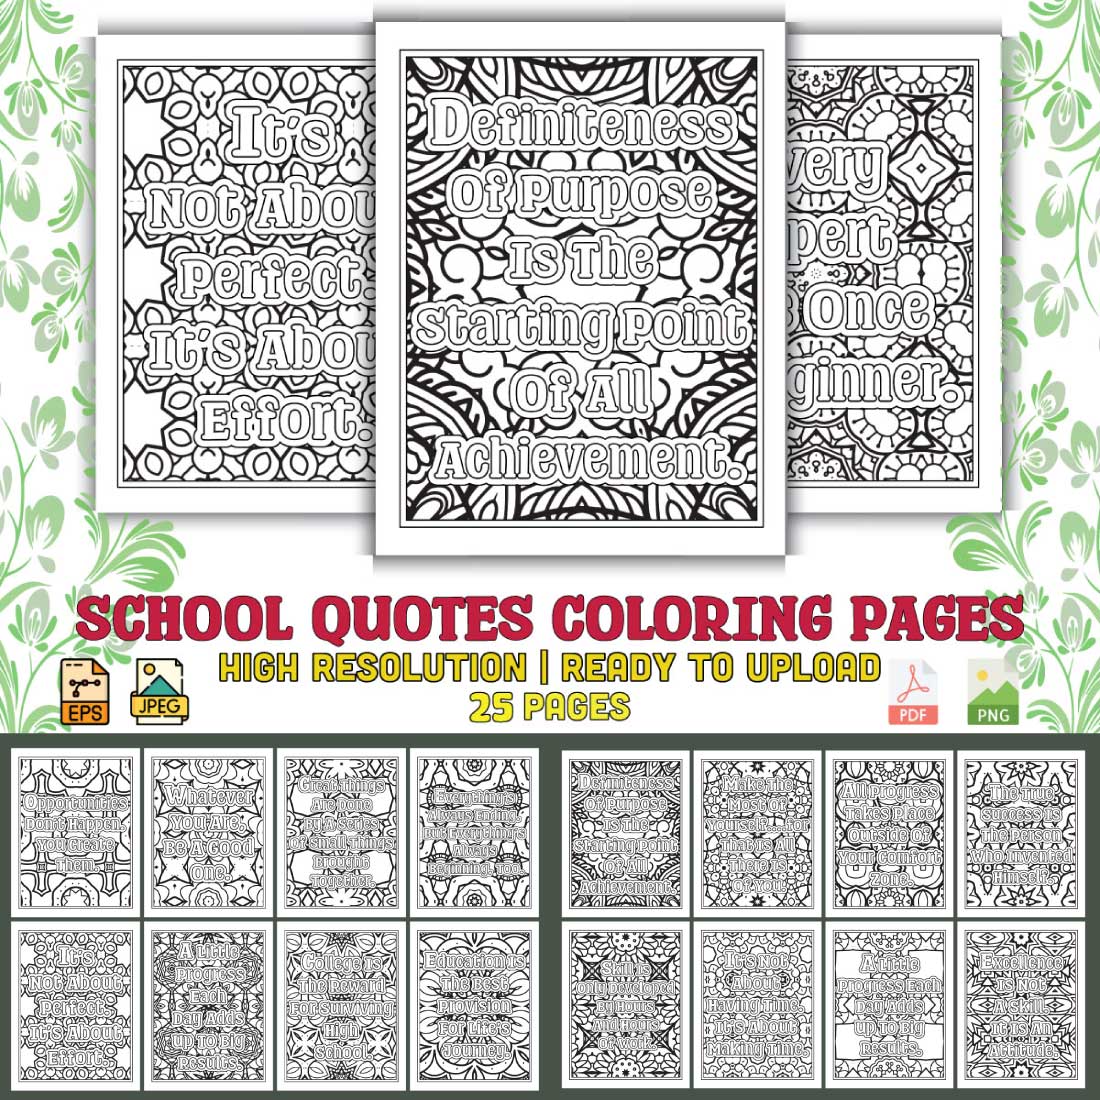 School Quotes Coloring Pages cover image.